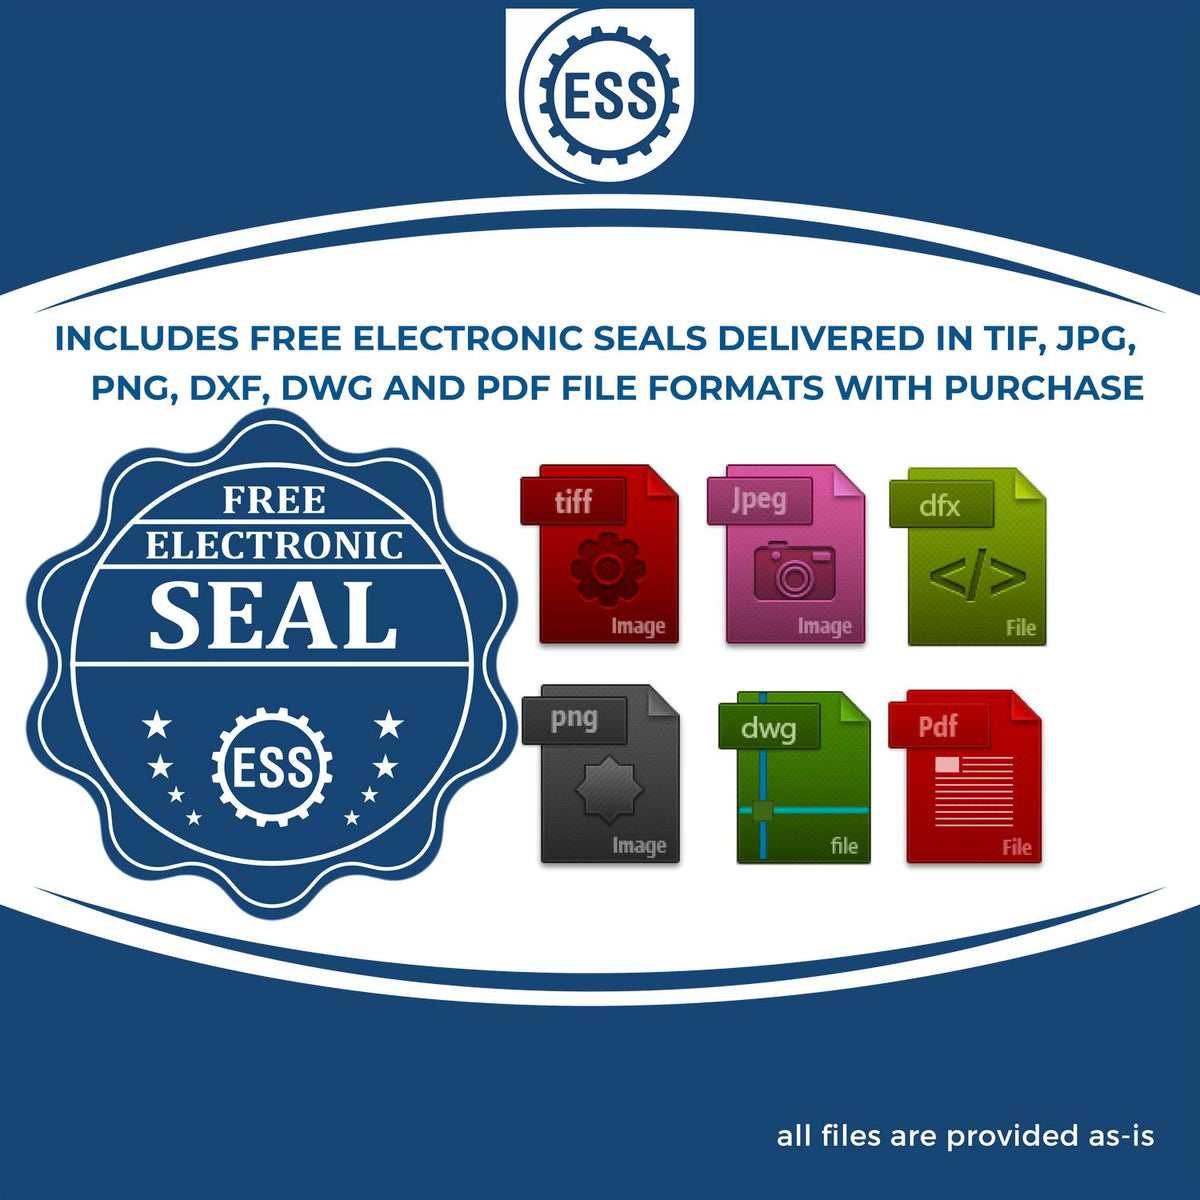 An infographic for the free electronic seal for the Heavy-Duty Wisconsin Rectangular Notary Stamp illustrating the different file type icons such as DXF, DWG, TIF, JPG and PNG.